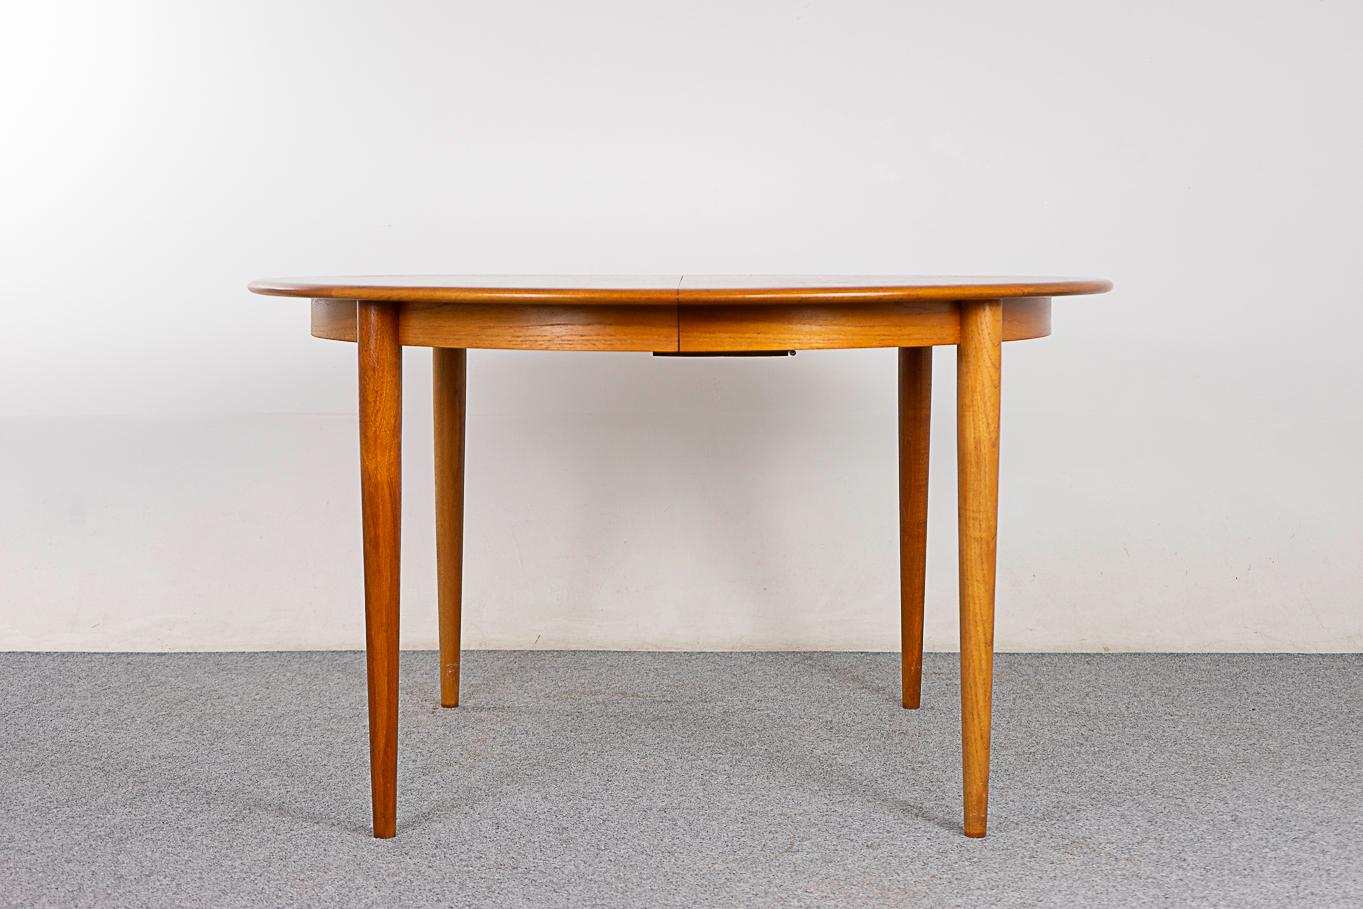 Teak mid-century dining table, circa 1960's. Lovely bookmatched veneer top, generous solid edging & sleek, elegant tapering legs. Cozy, social circular shape is perfect for 4 people. Add leaves to seat up to 8! Self storing drop down leg adds